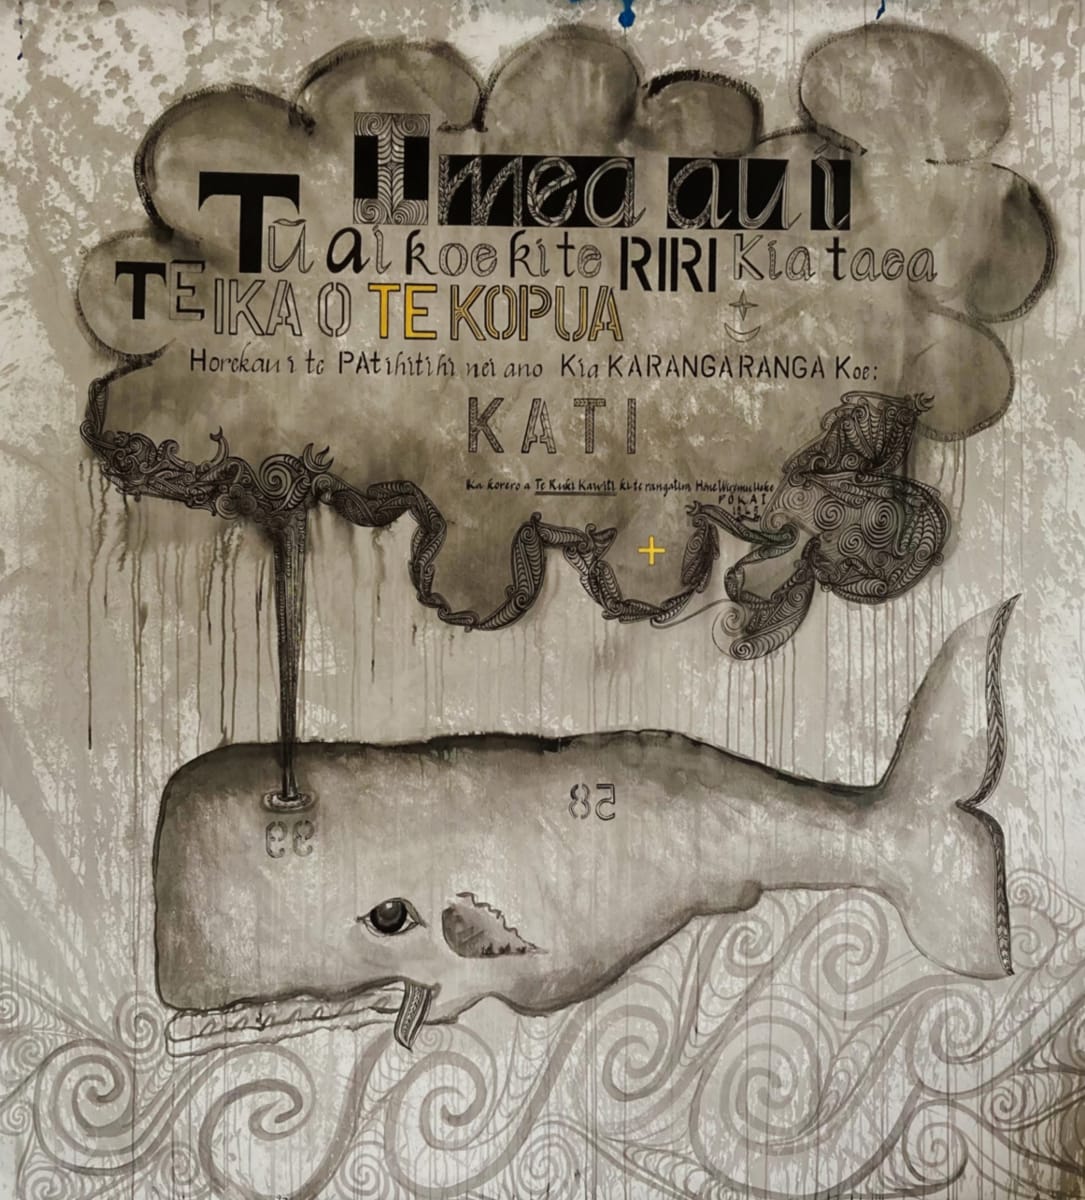 Te Kōpua 'the deep' by Dr  Rangihiroa Panoho  Image: Te Kōpua 'the deep' refers to a conversation in 1845 prior to the battle of Ruapekapeka between Northern leaders Te Ruki Kawiti of Ngāti Hineamaru and Hone Heke Pōkai of Ngāti Rāhiri and the British and Māori allies. Kawiti tells younger ally that he warned him they would have to go out into the deep to catch their big fish. Now that the water is only ankle deep, he chides Heke, you are saying no more, stop.